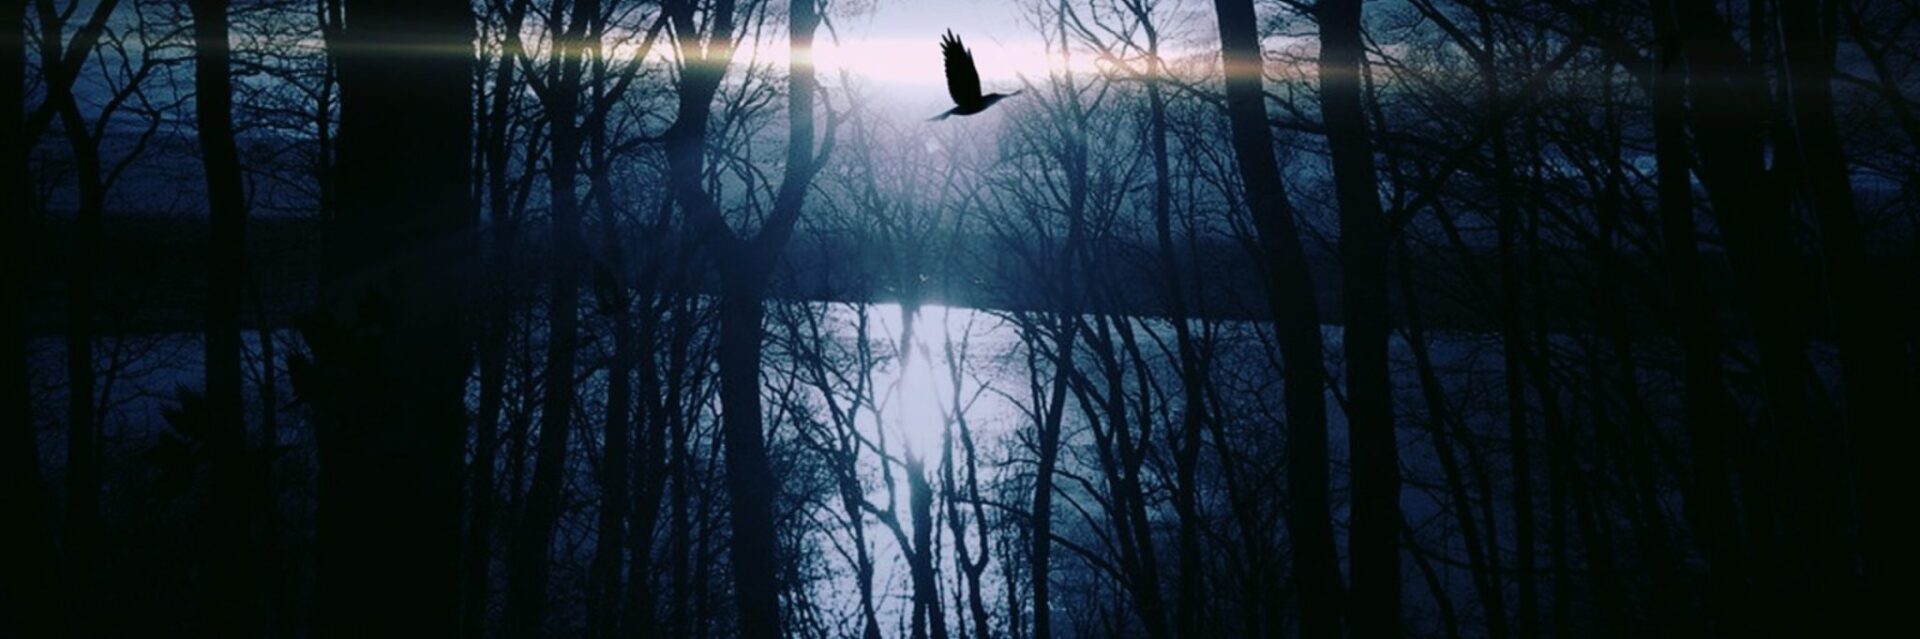 A bird flying over trees in the dark.